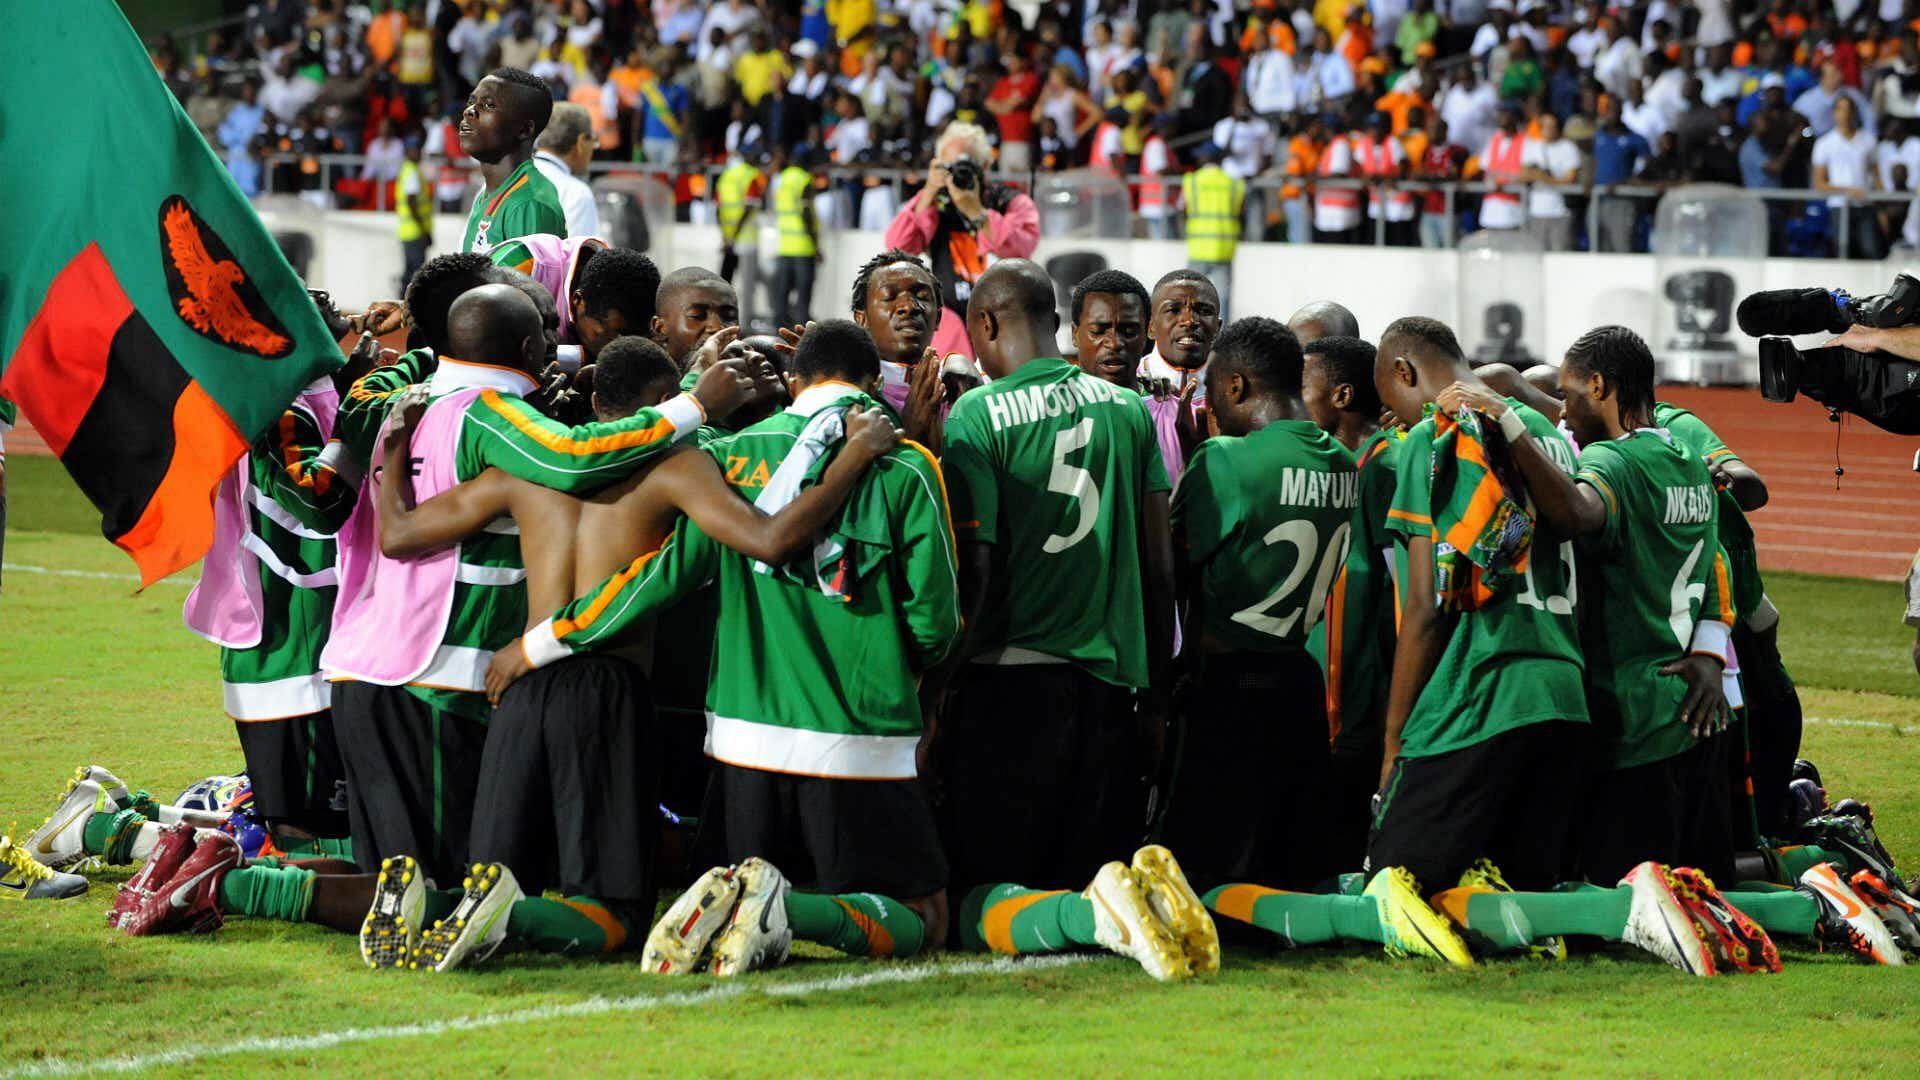 The Chipolopolo of Zambia celebrating after their AFCON win